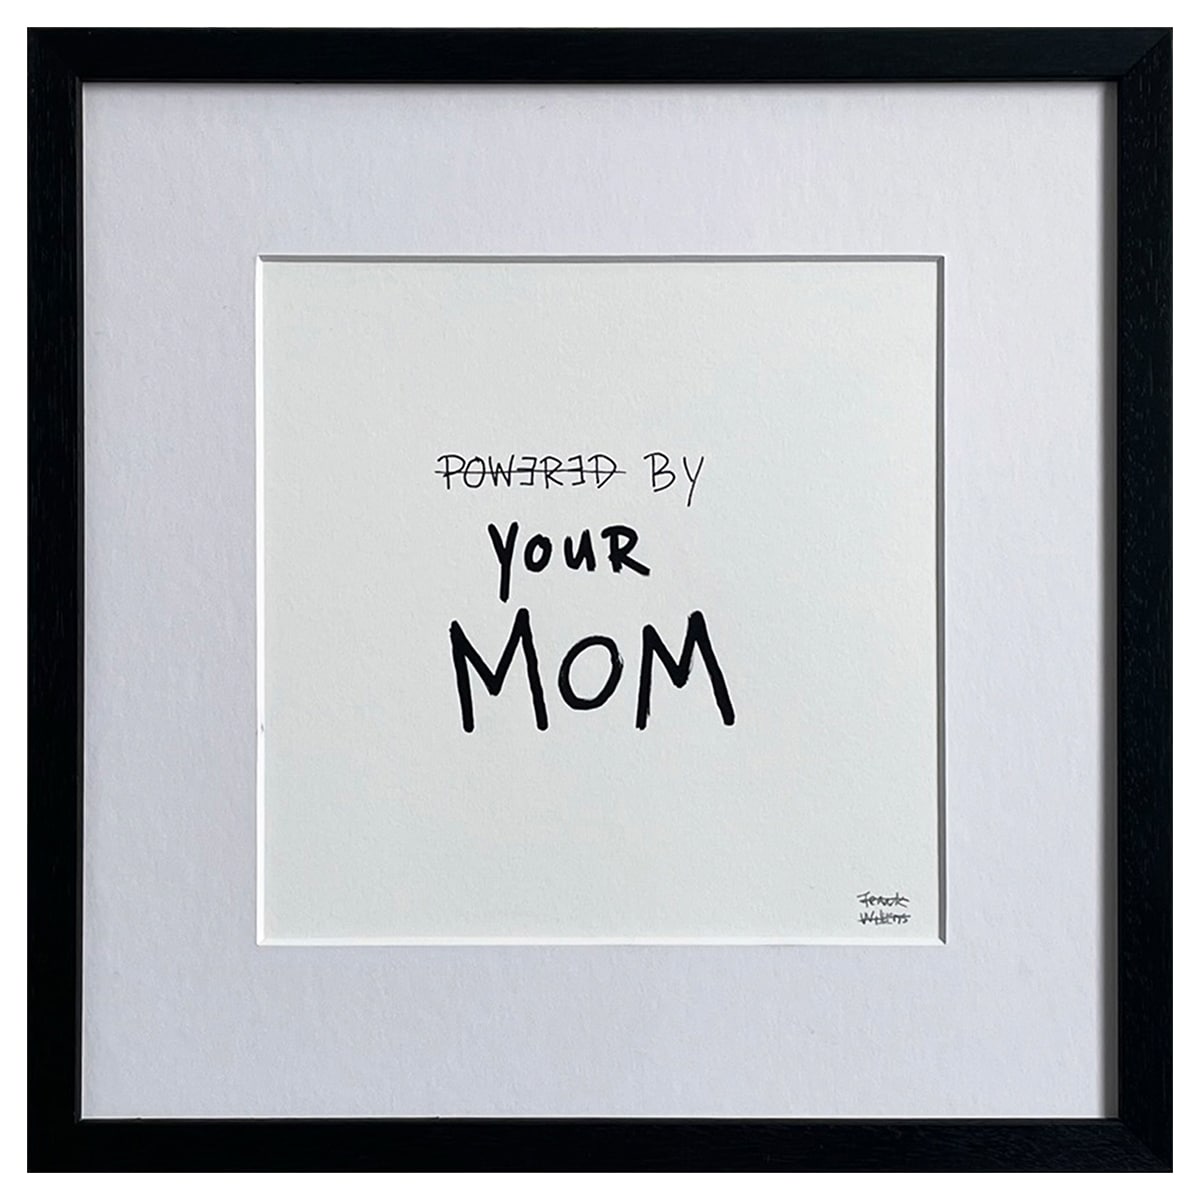 POWERED BY YOUR MOM - Frank Willems